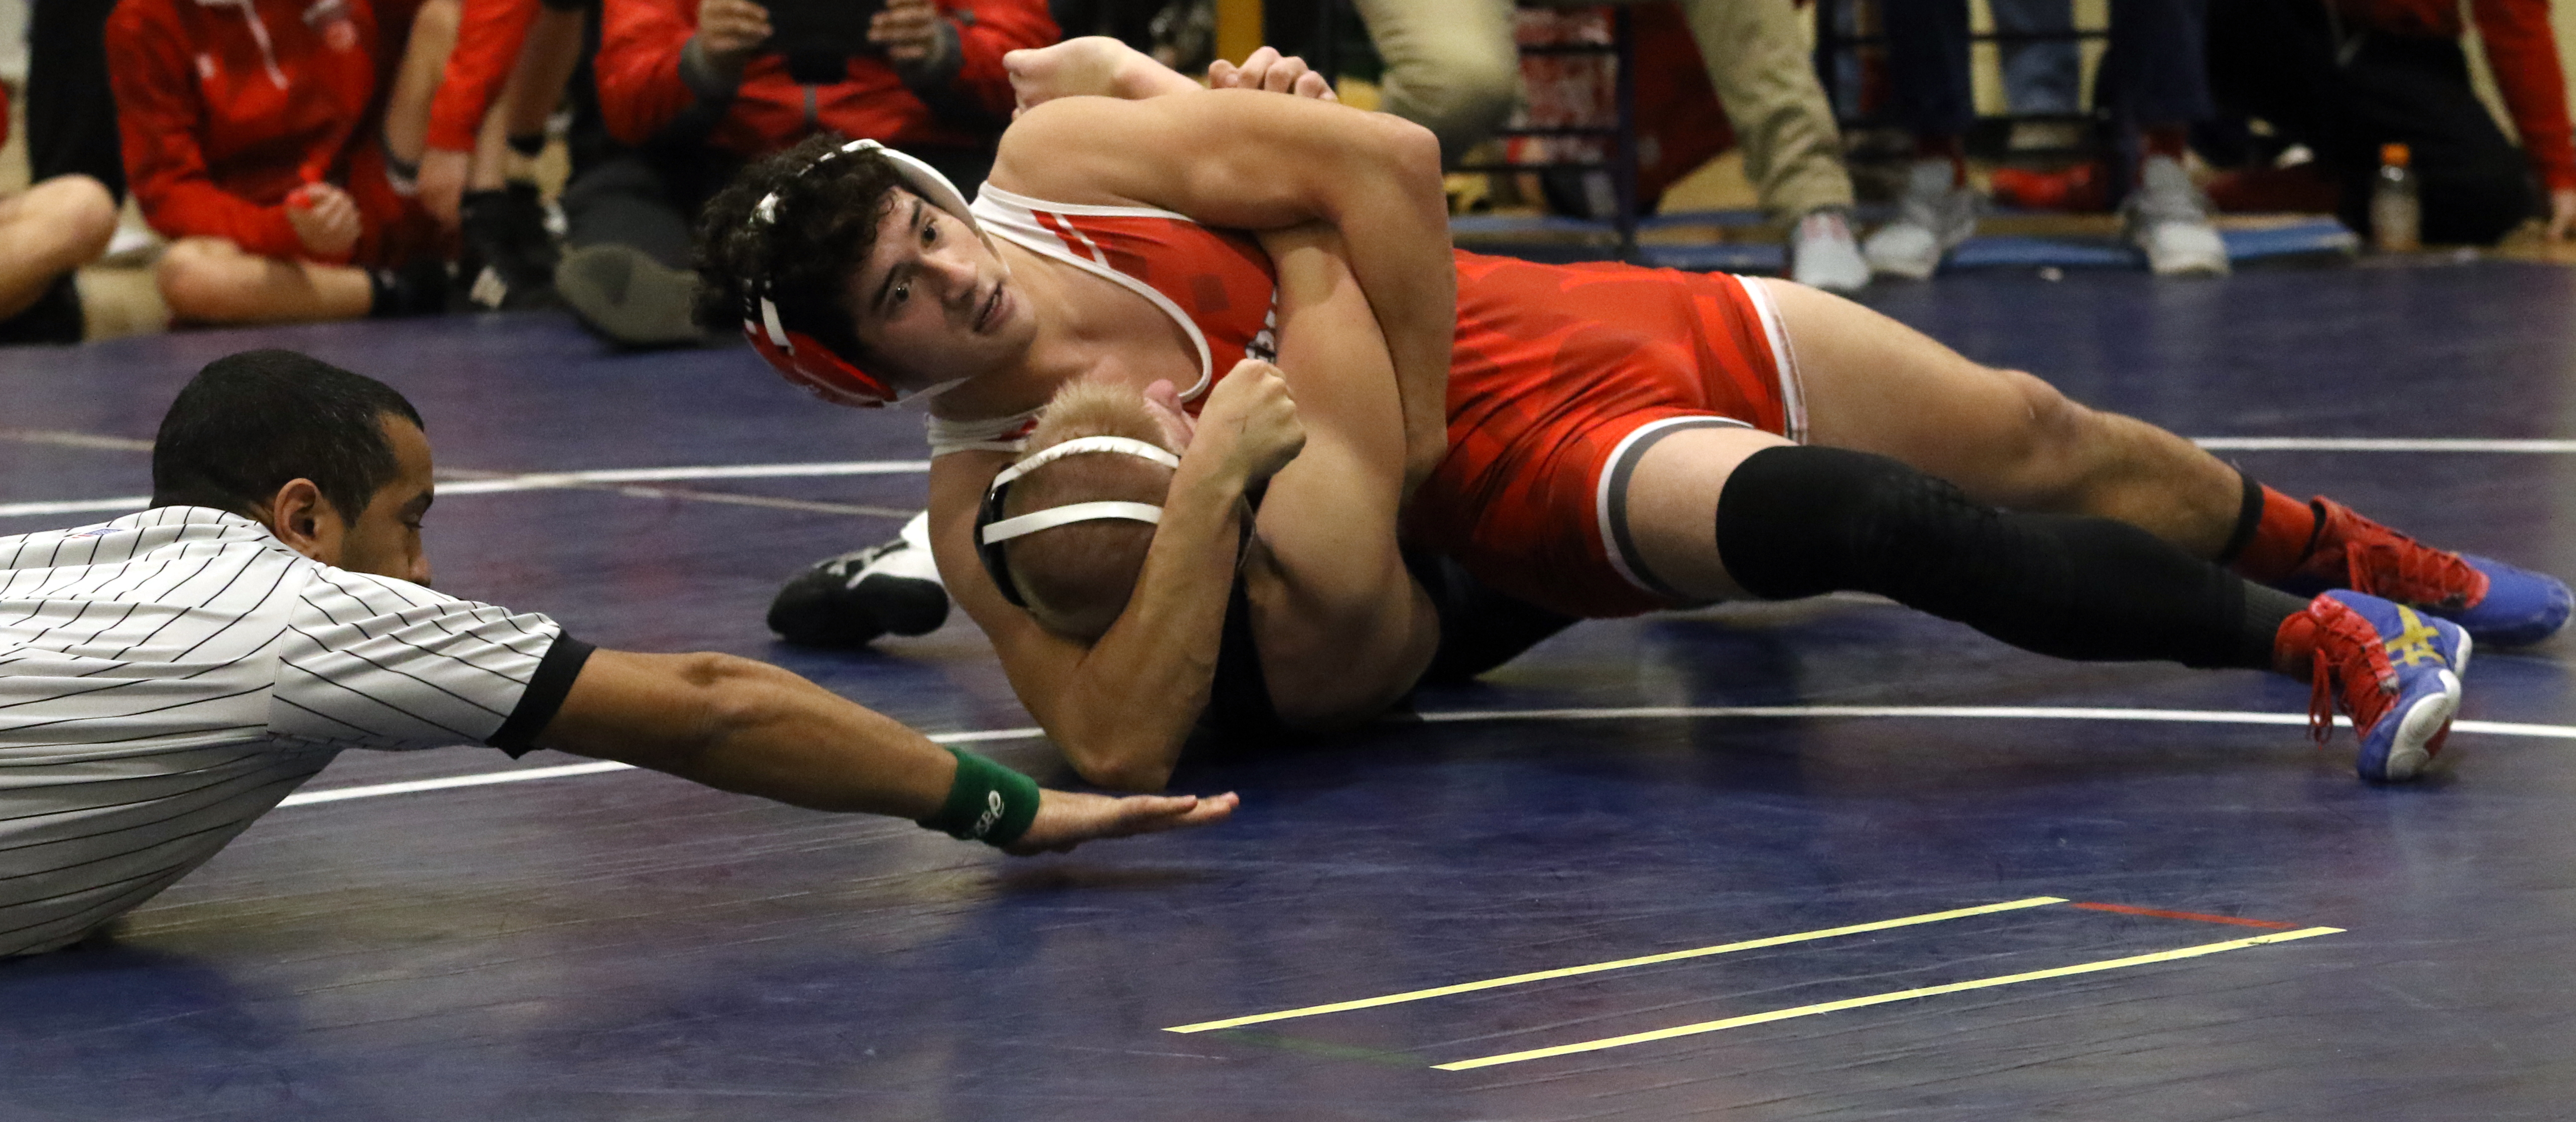 WAVERLY ADVANCES FOUR INTO SEMIFINALS; IN SEVENTH PLACE AT ONEONTA ROTARY TOURNAMENT